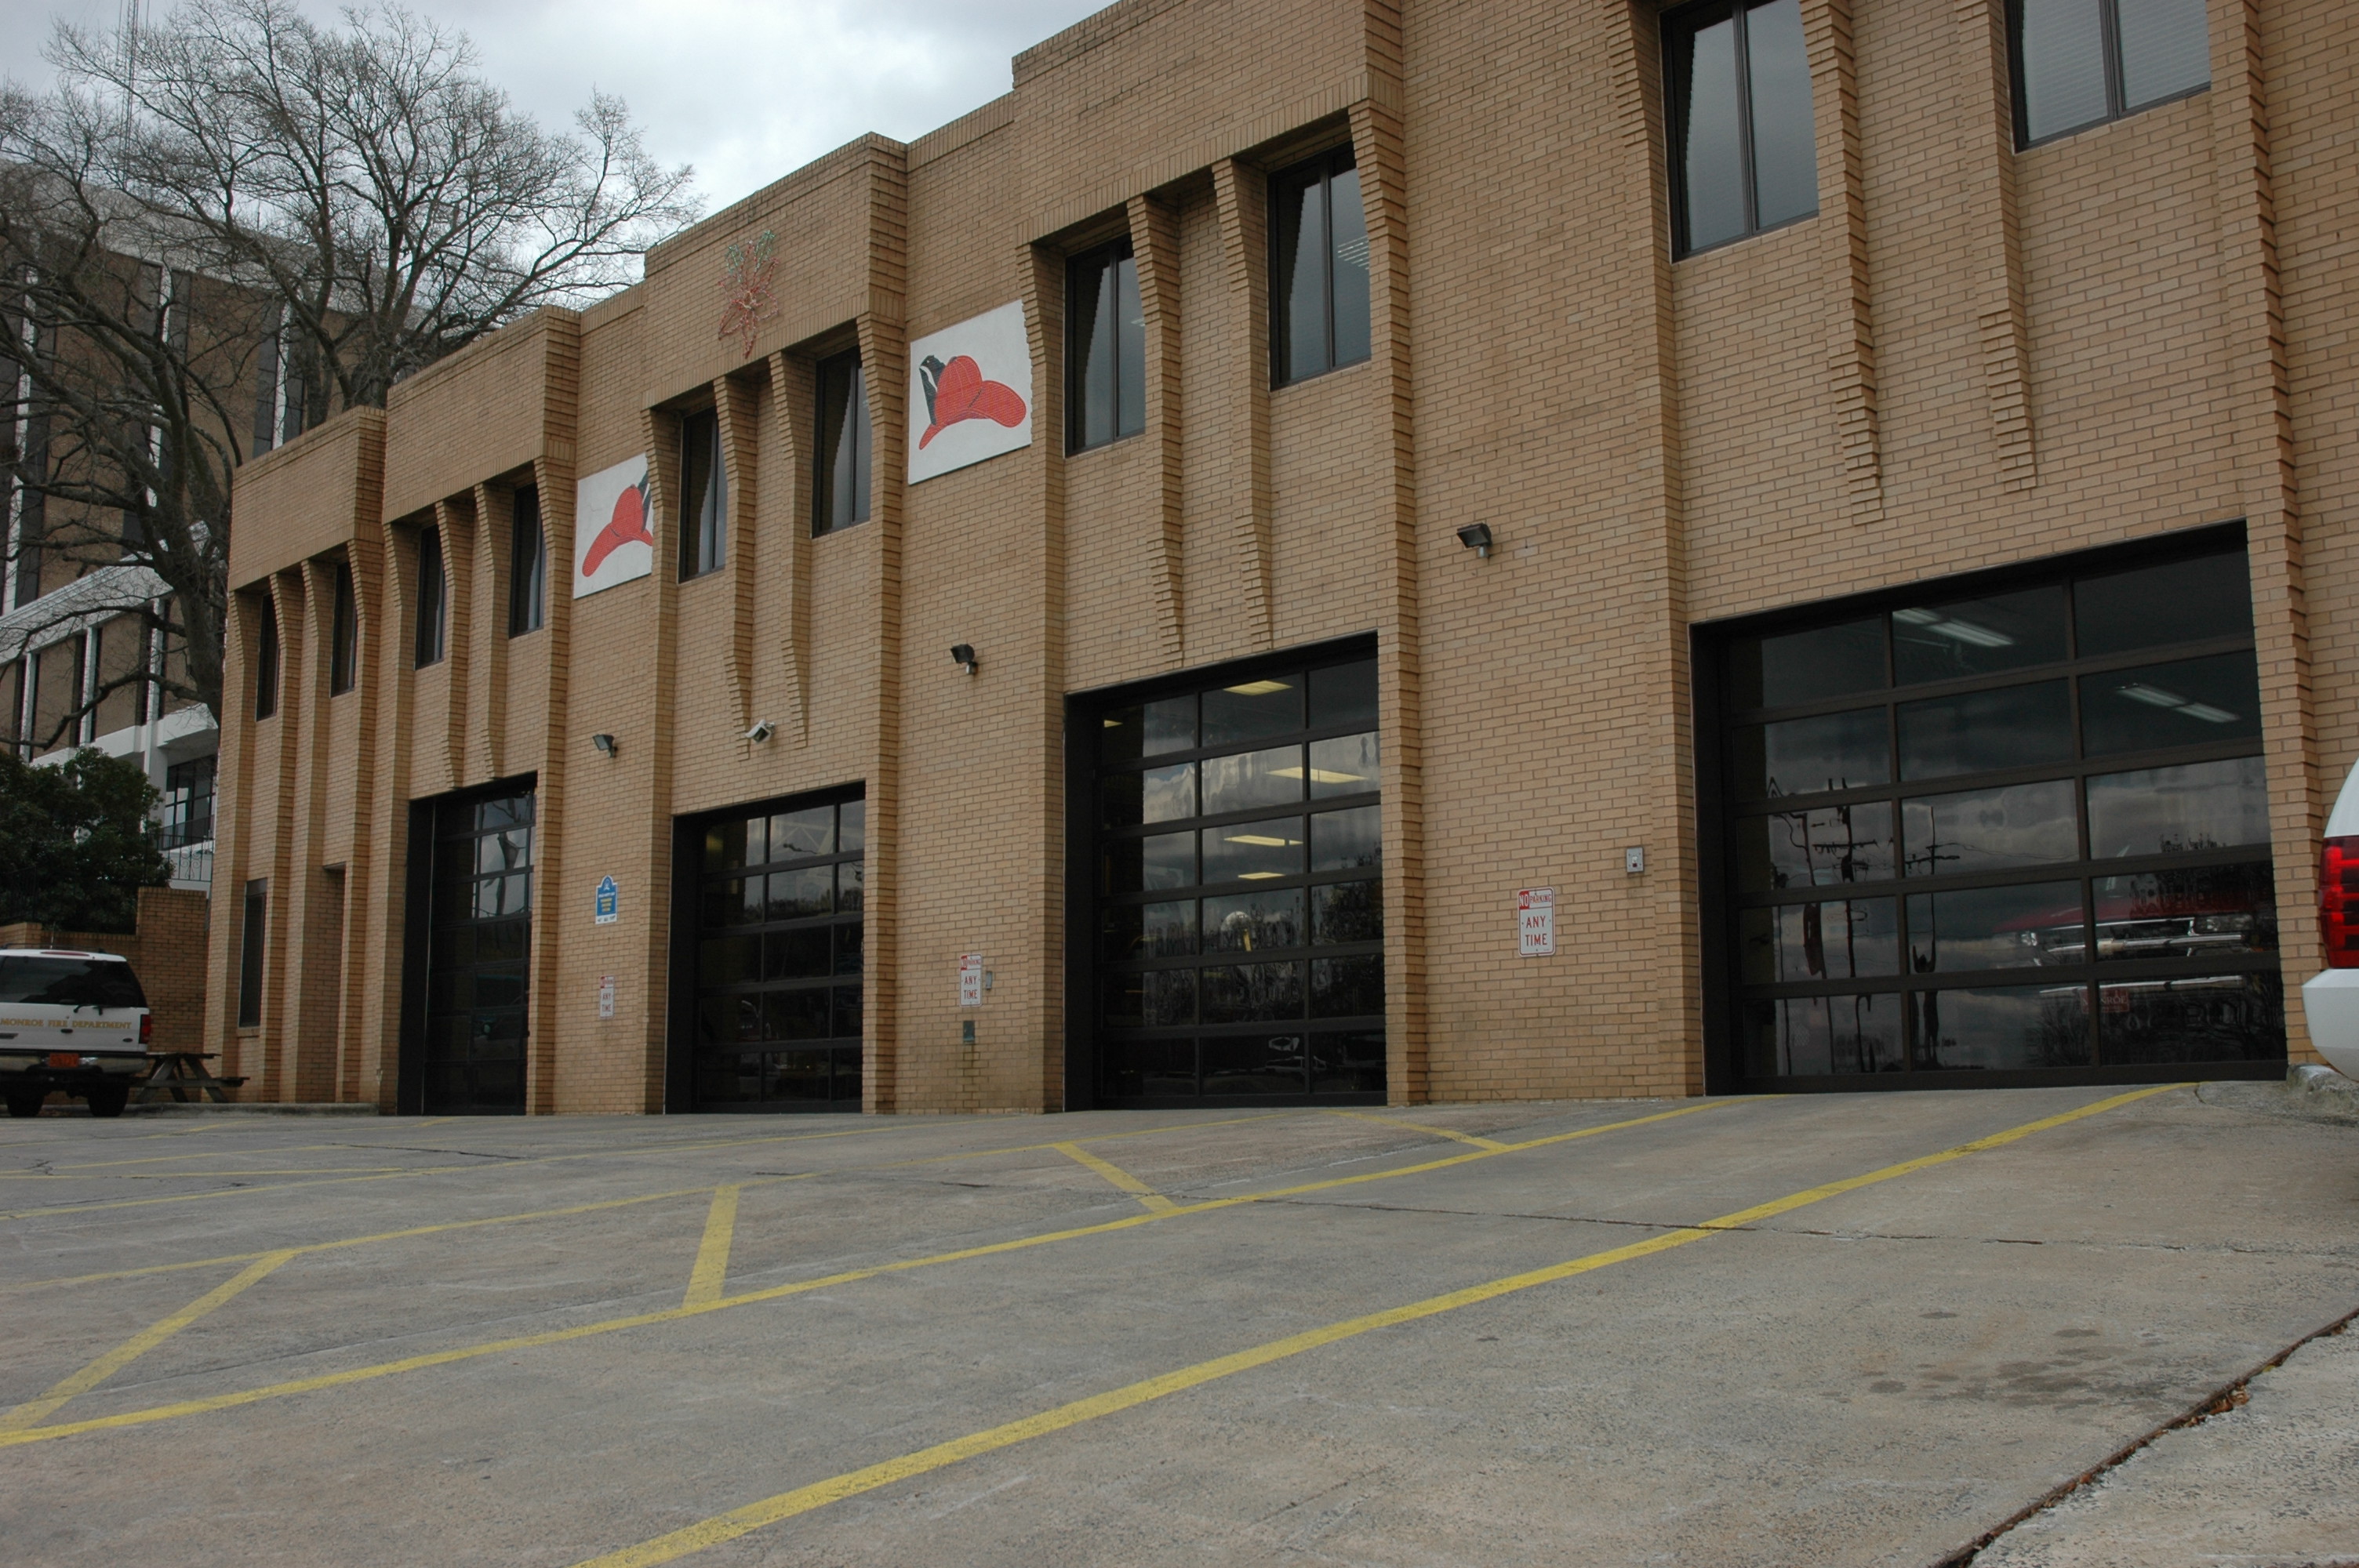 Fire Station One